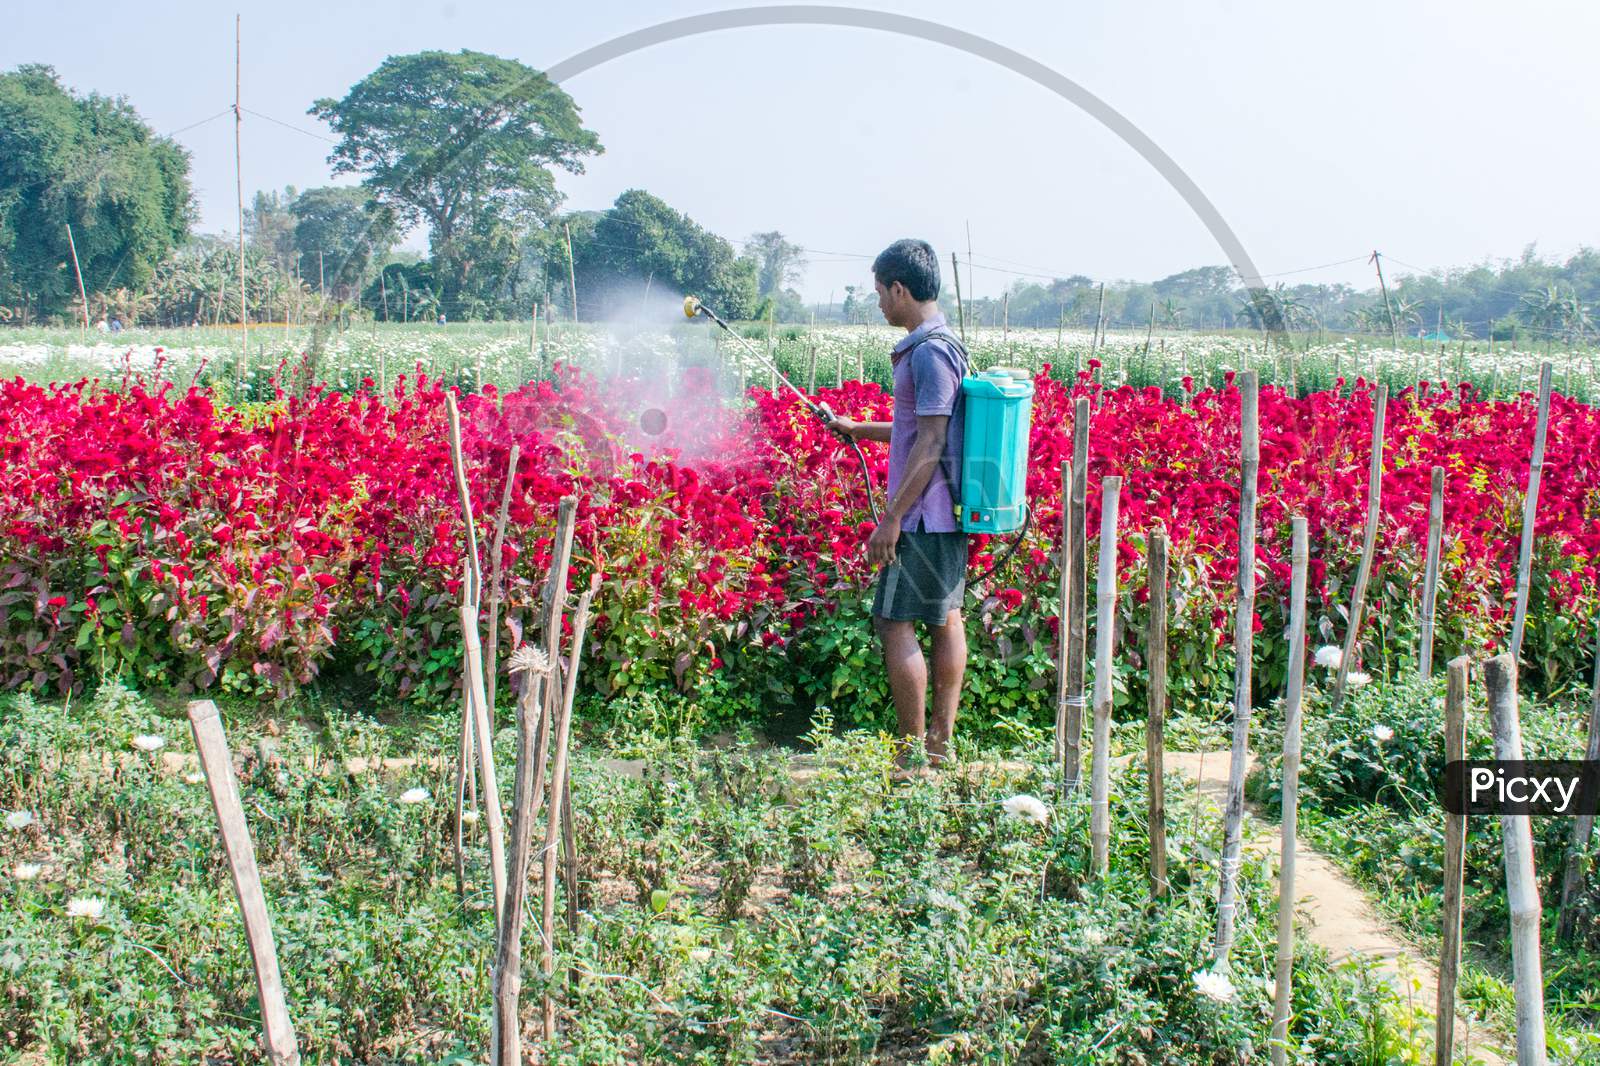 sraying pesticide at rural flower field in nadia